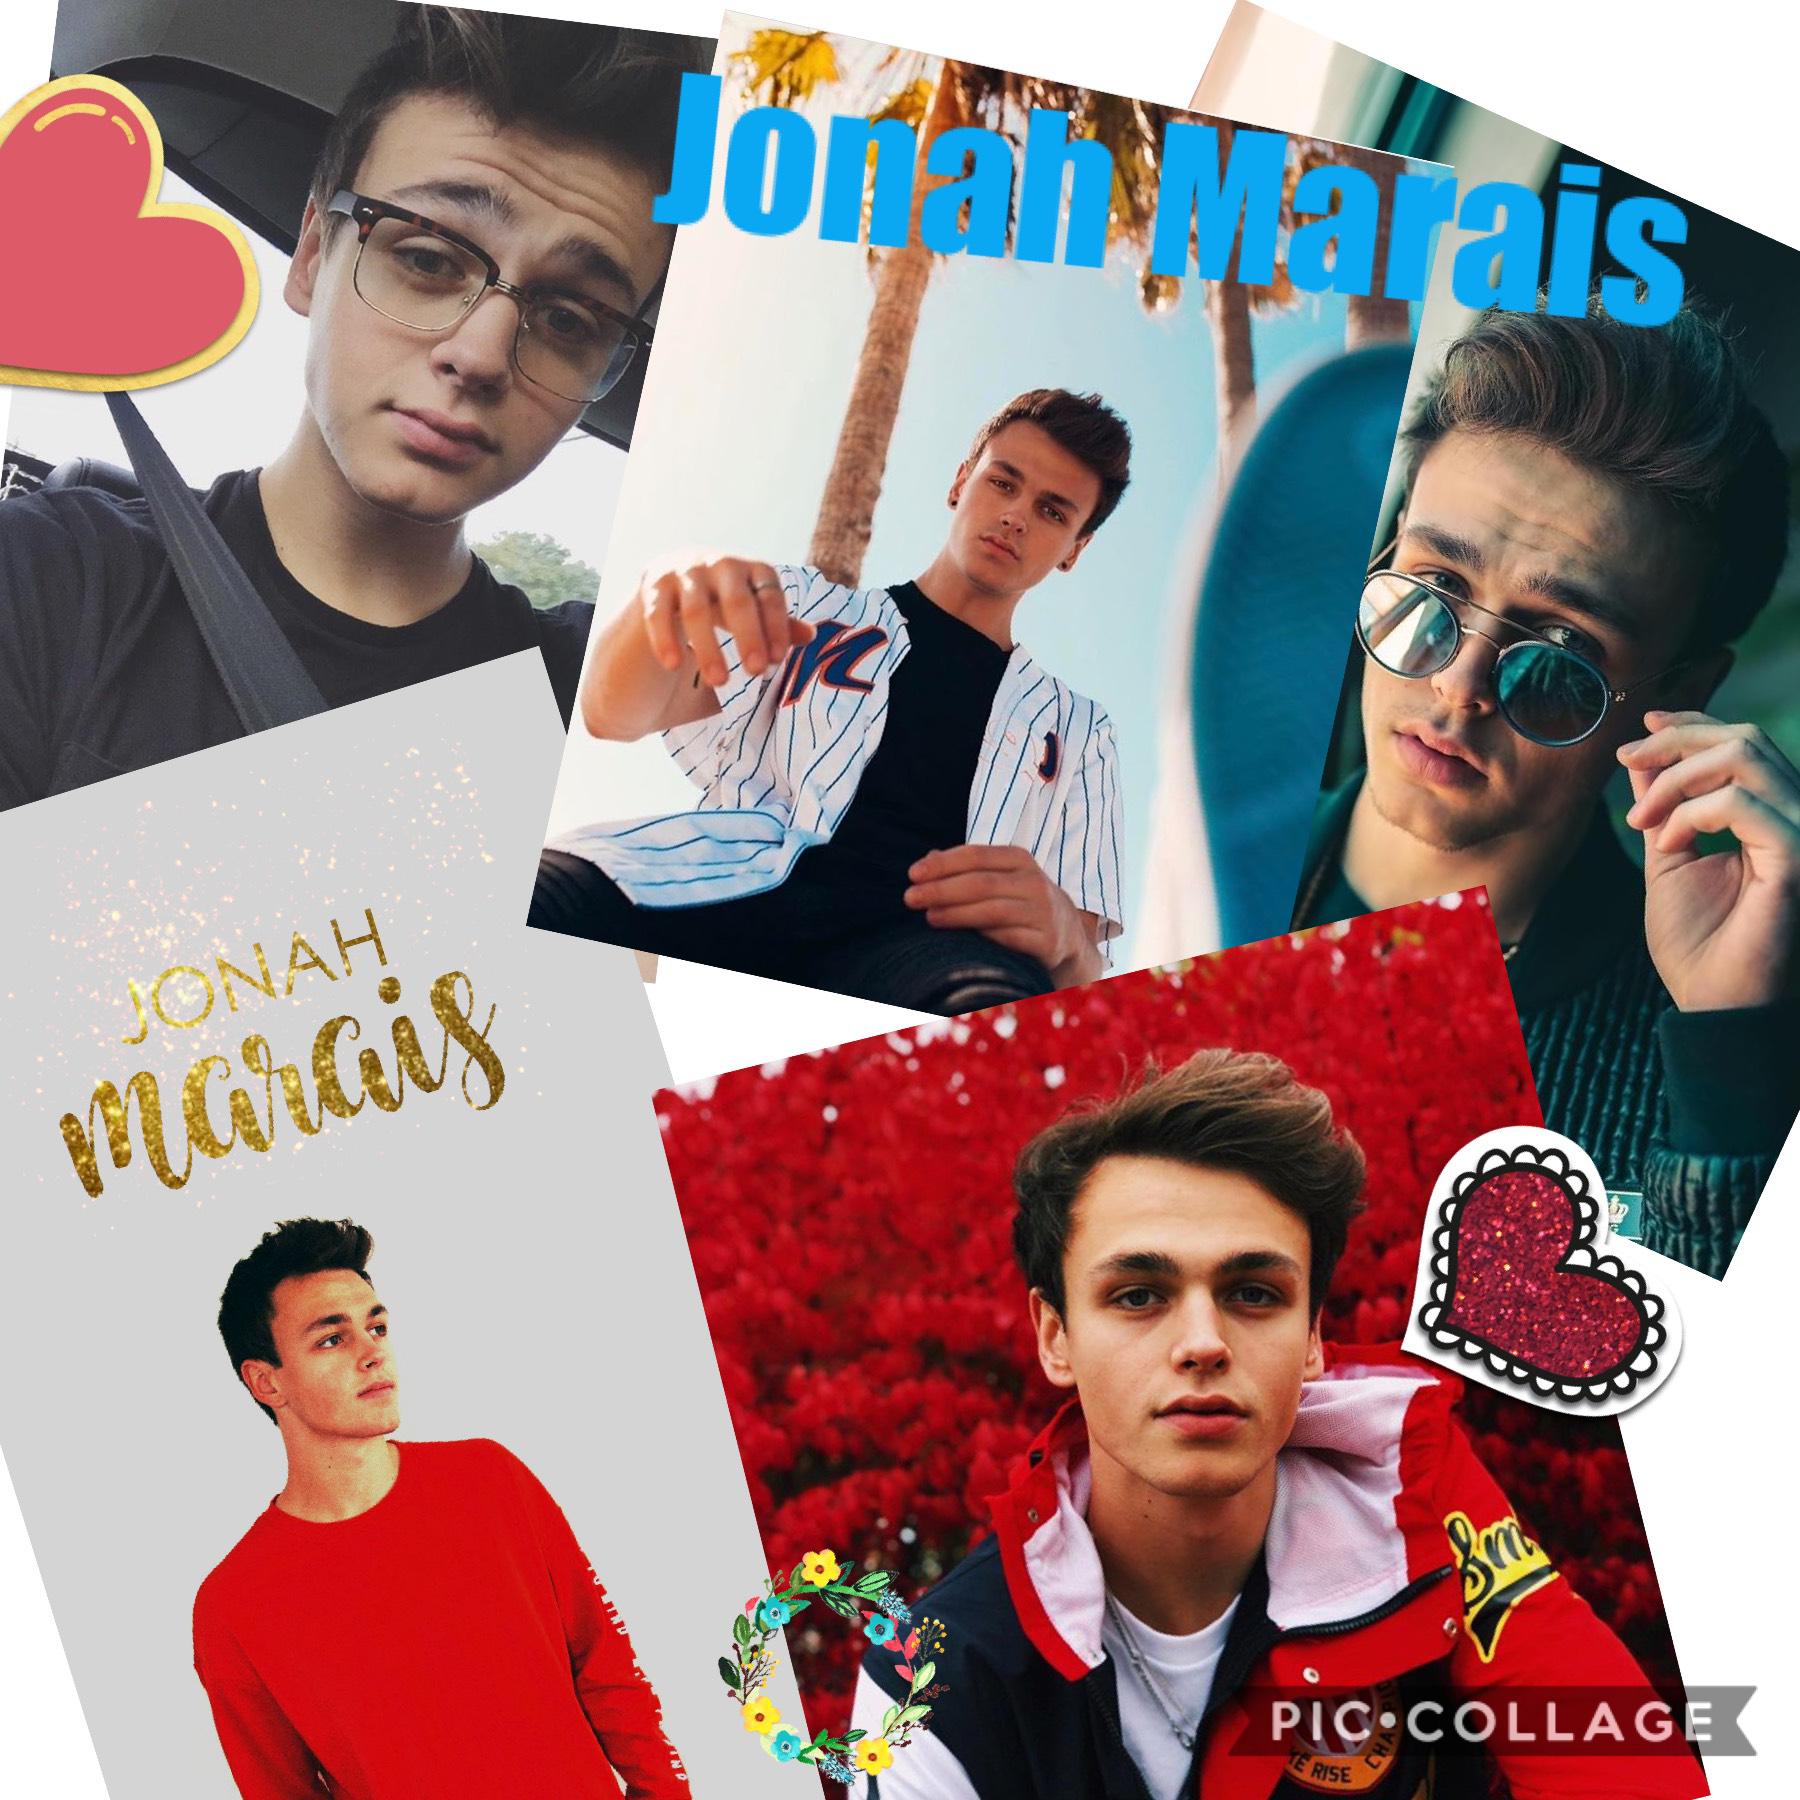 Editzz. So I know it’s Dani’s bday but Jonah is my lane so
I’m posting him first